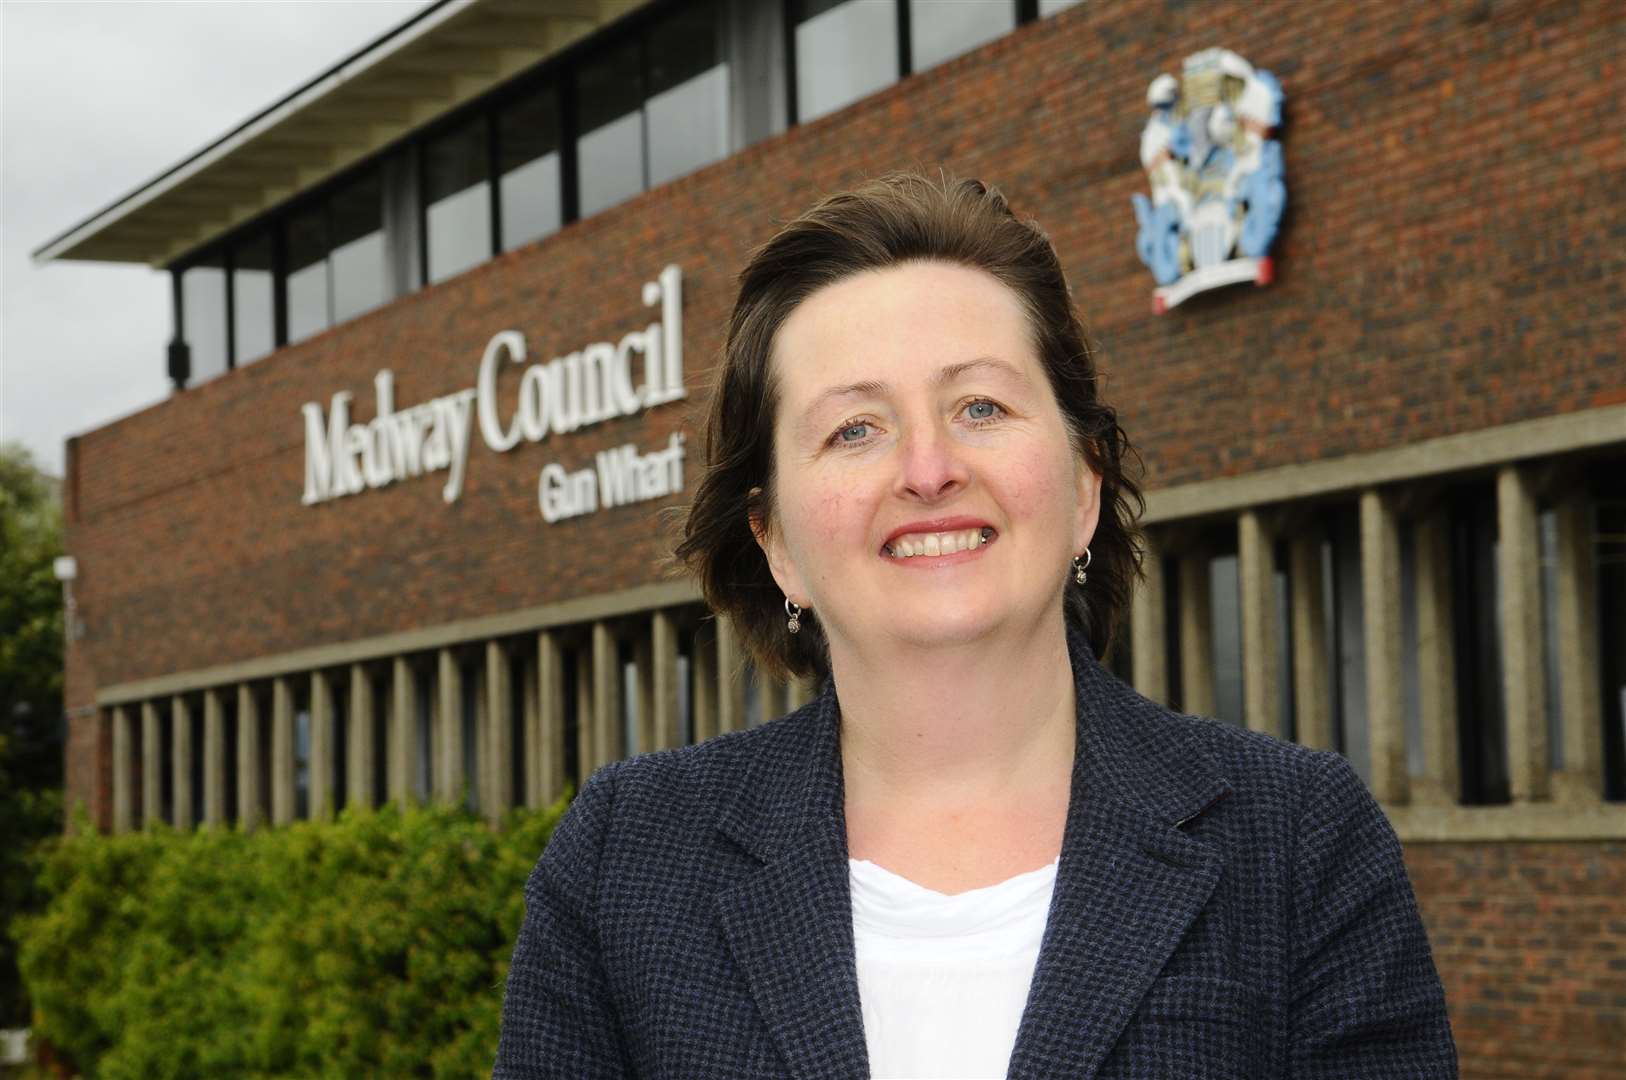 Barbara Peacock, director of children's services for Medway Council